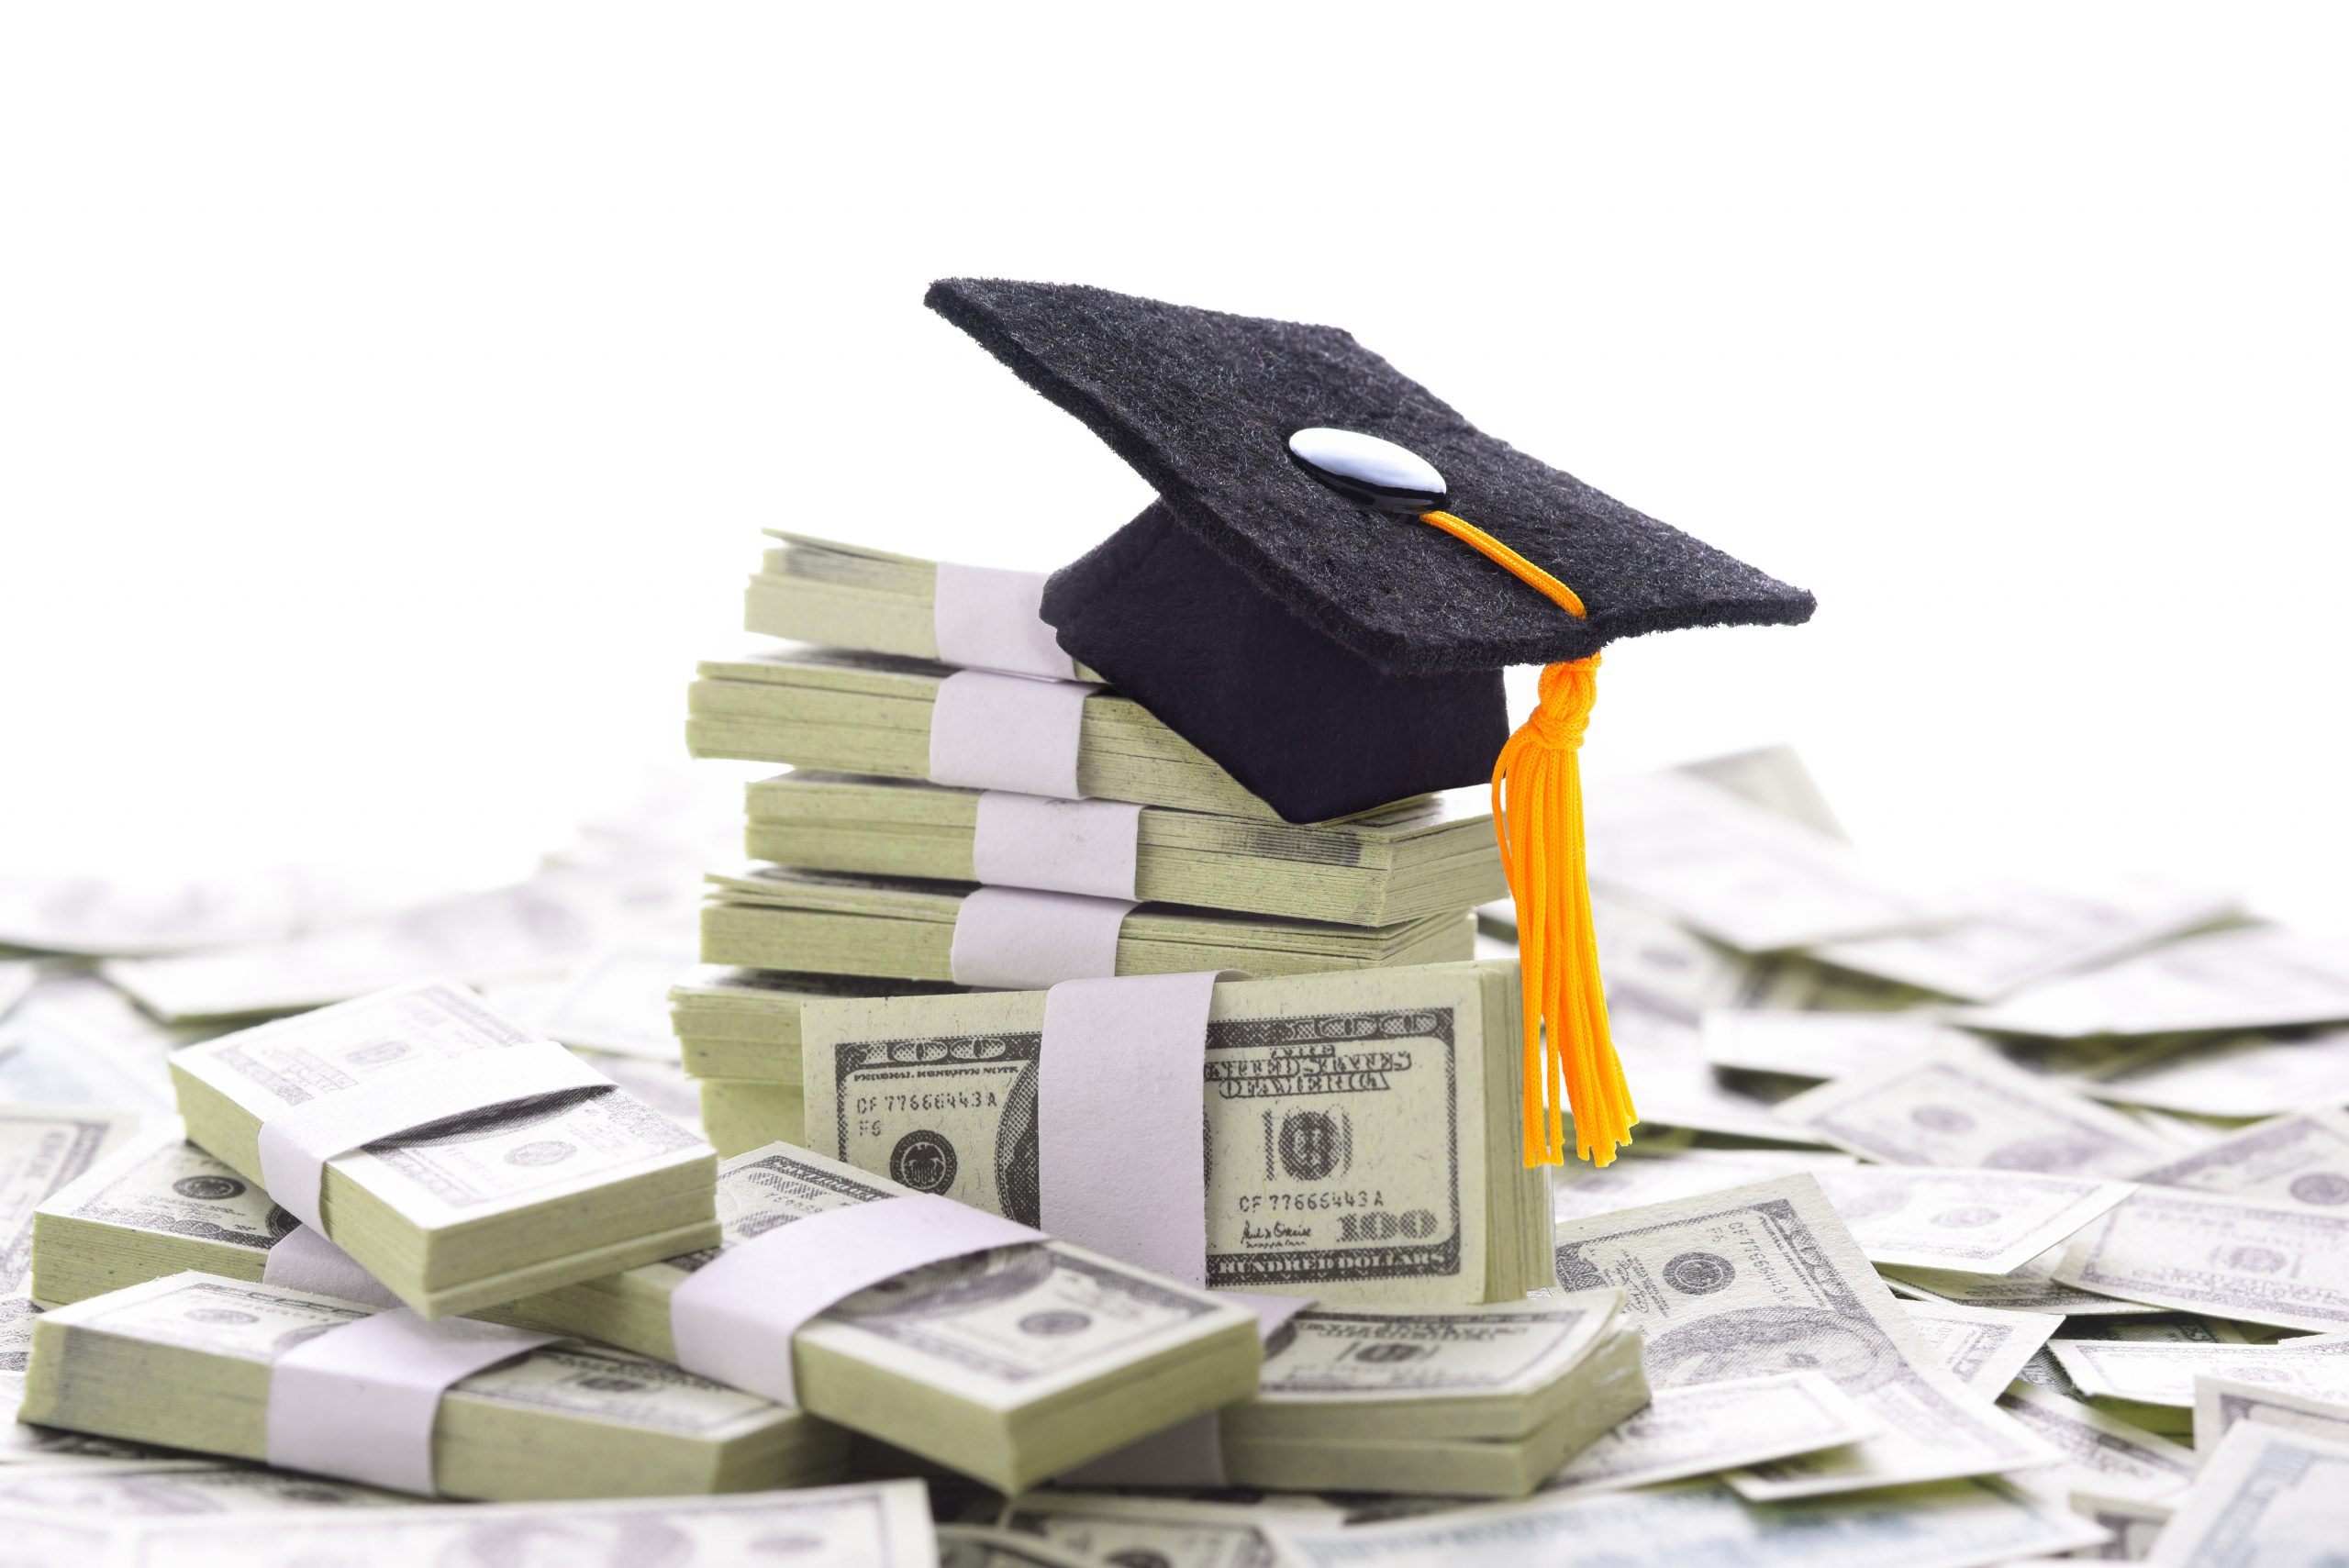 Mortarboard on a pile of money representing the high cost of higher education and bribery